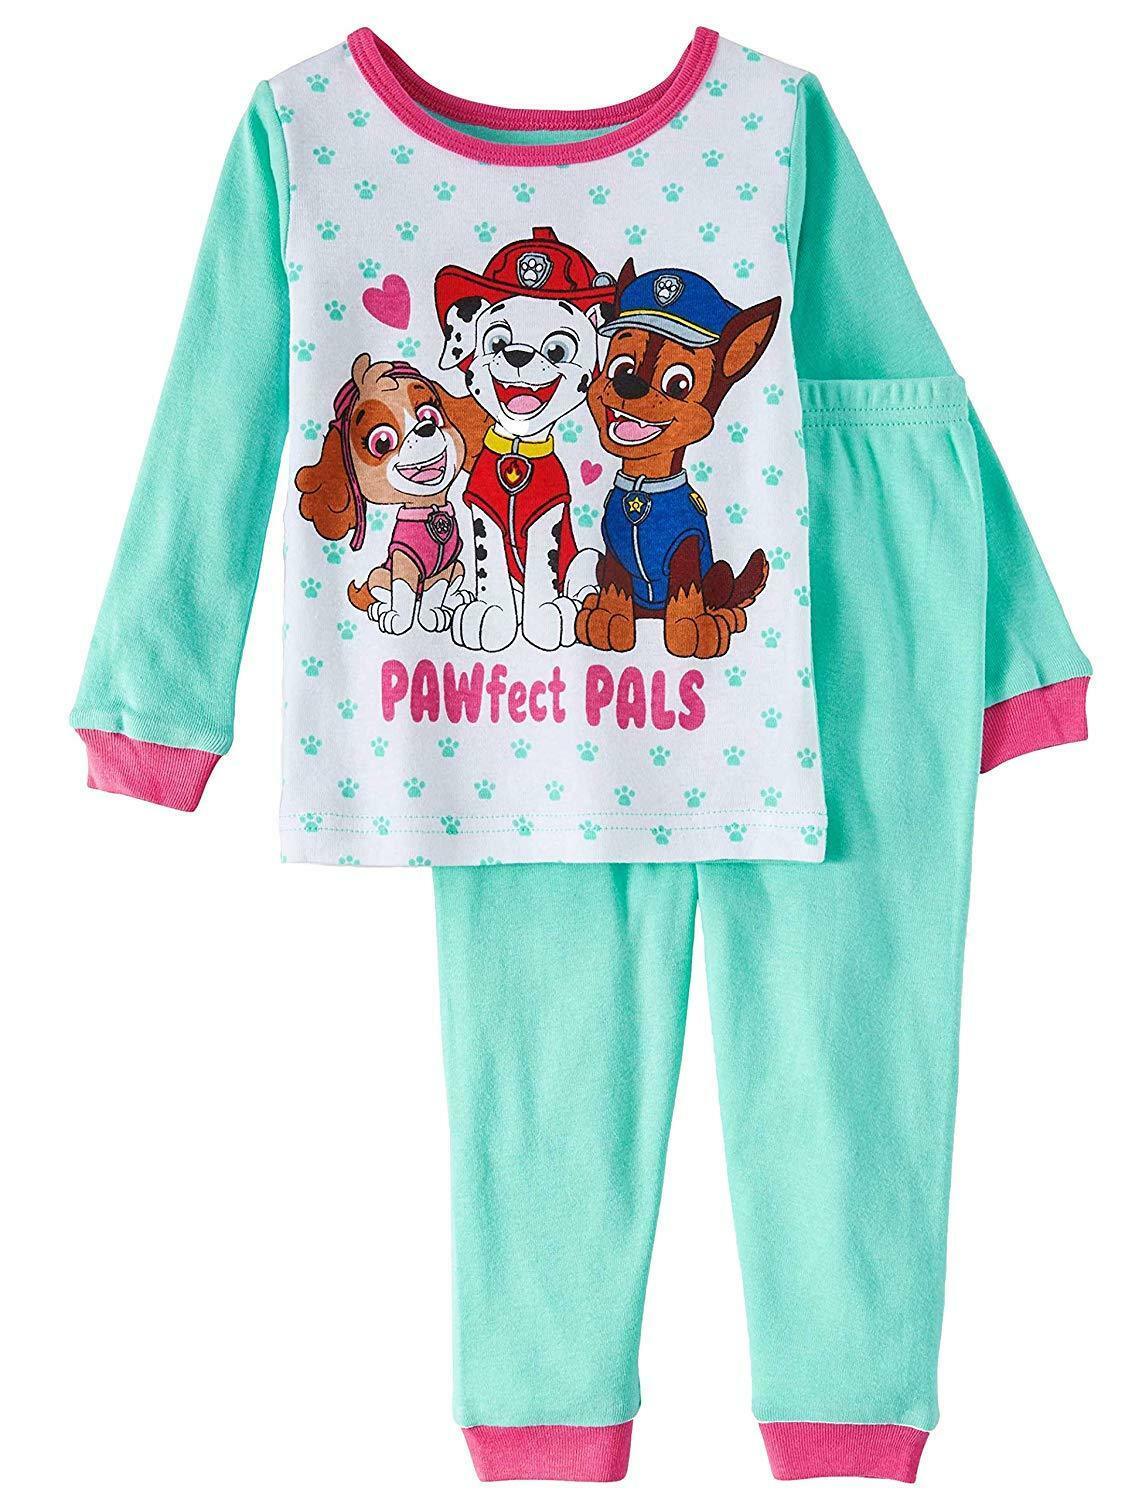 Primary image for DISNEY Toddler Girls' Pajama Set 2-Piece Flannel Long-Sleeve Size 3T- Paw Patrol